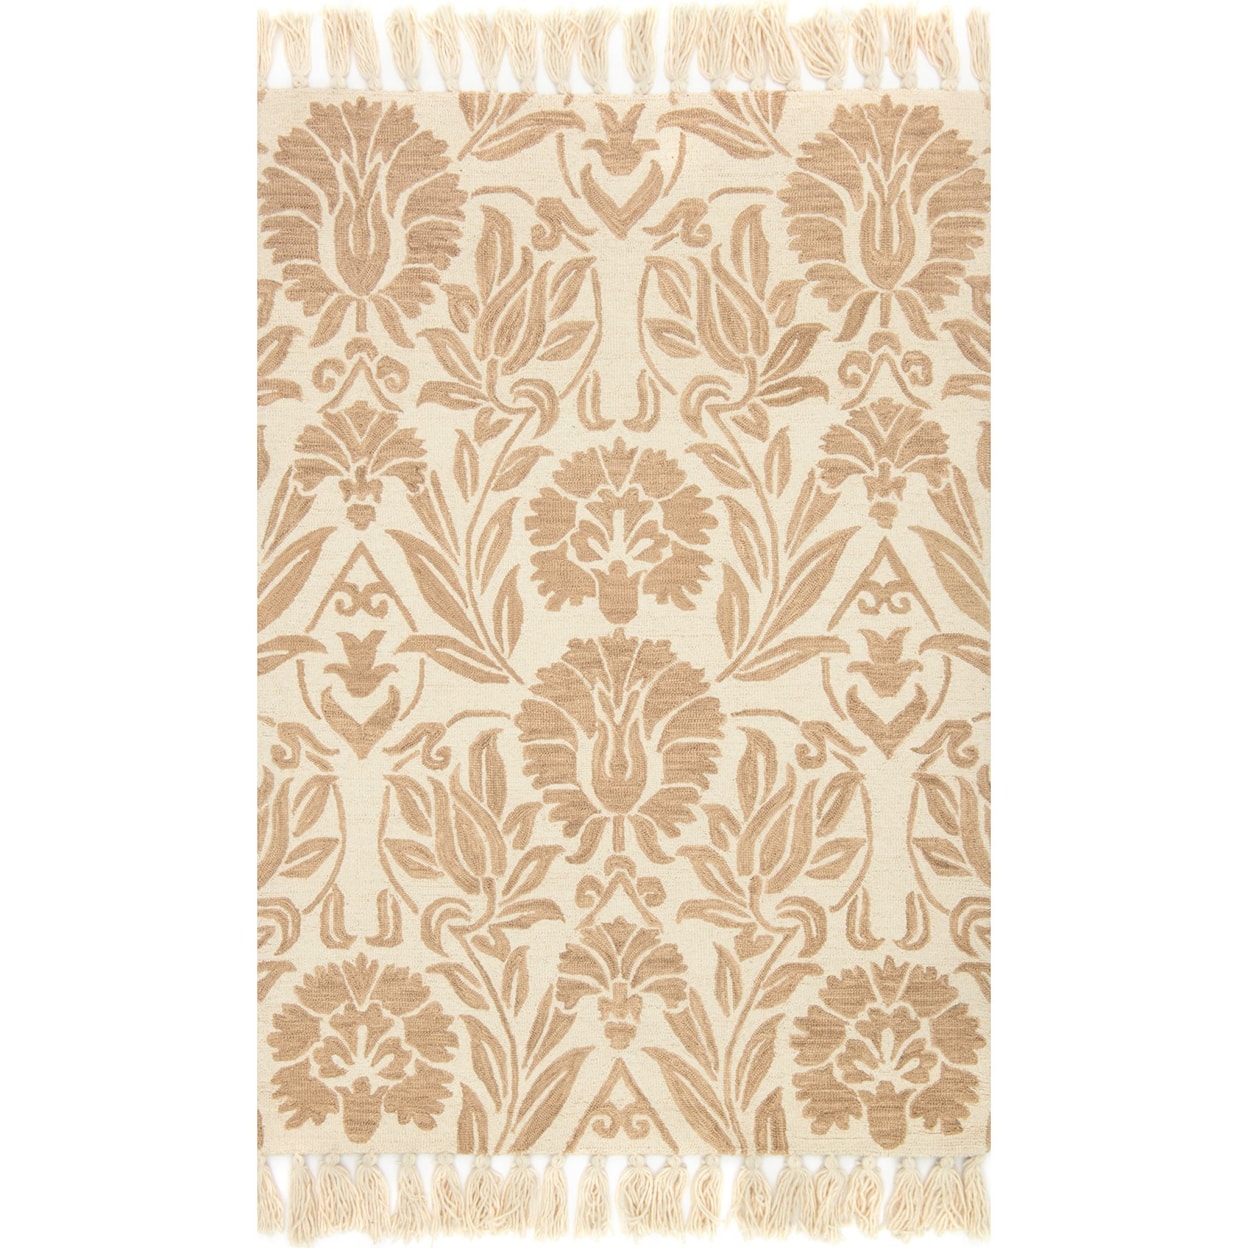 Magnolia Home by Joanna Gaines for Loloi Jozie Day 5' 0" x 7' 6" Rectangle Rug